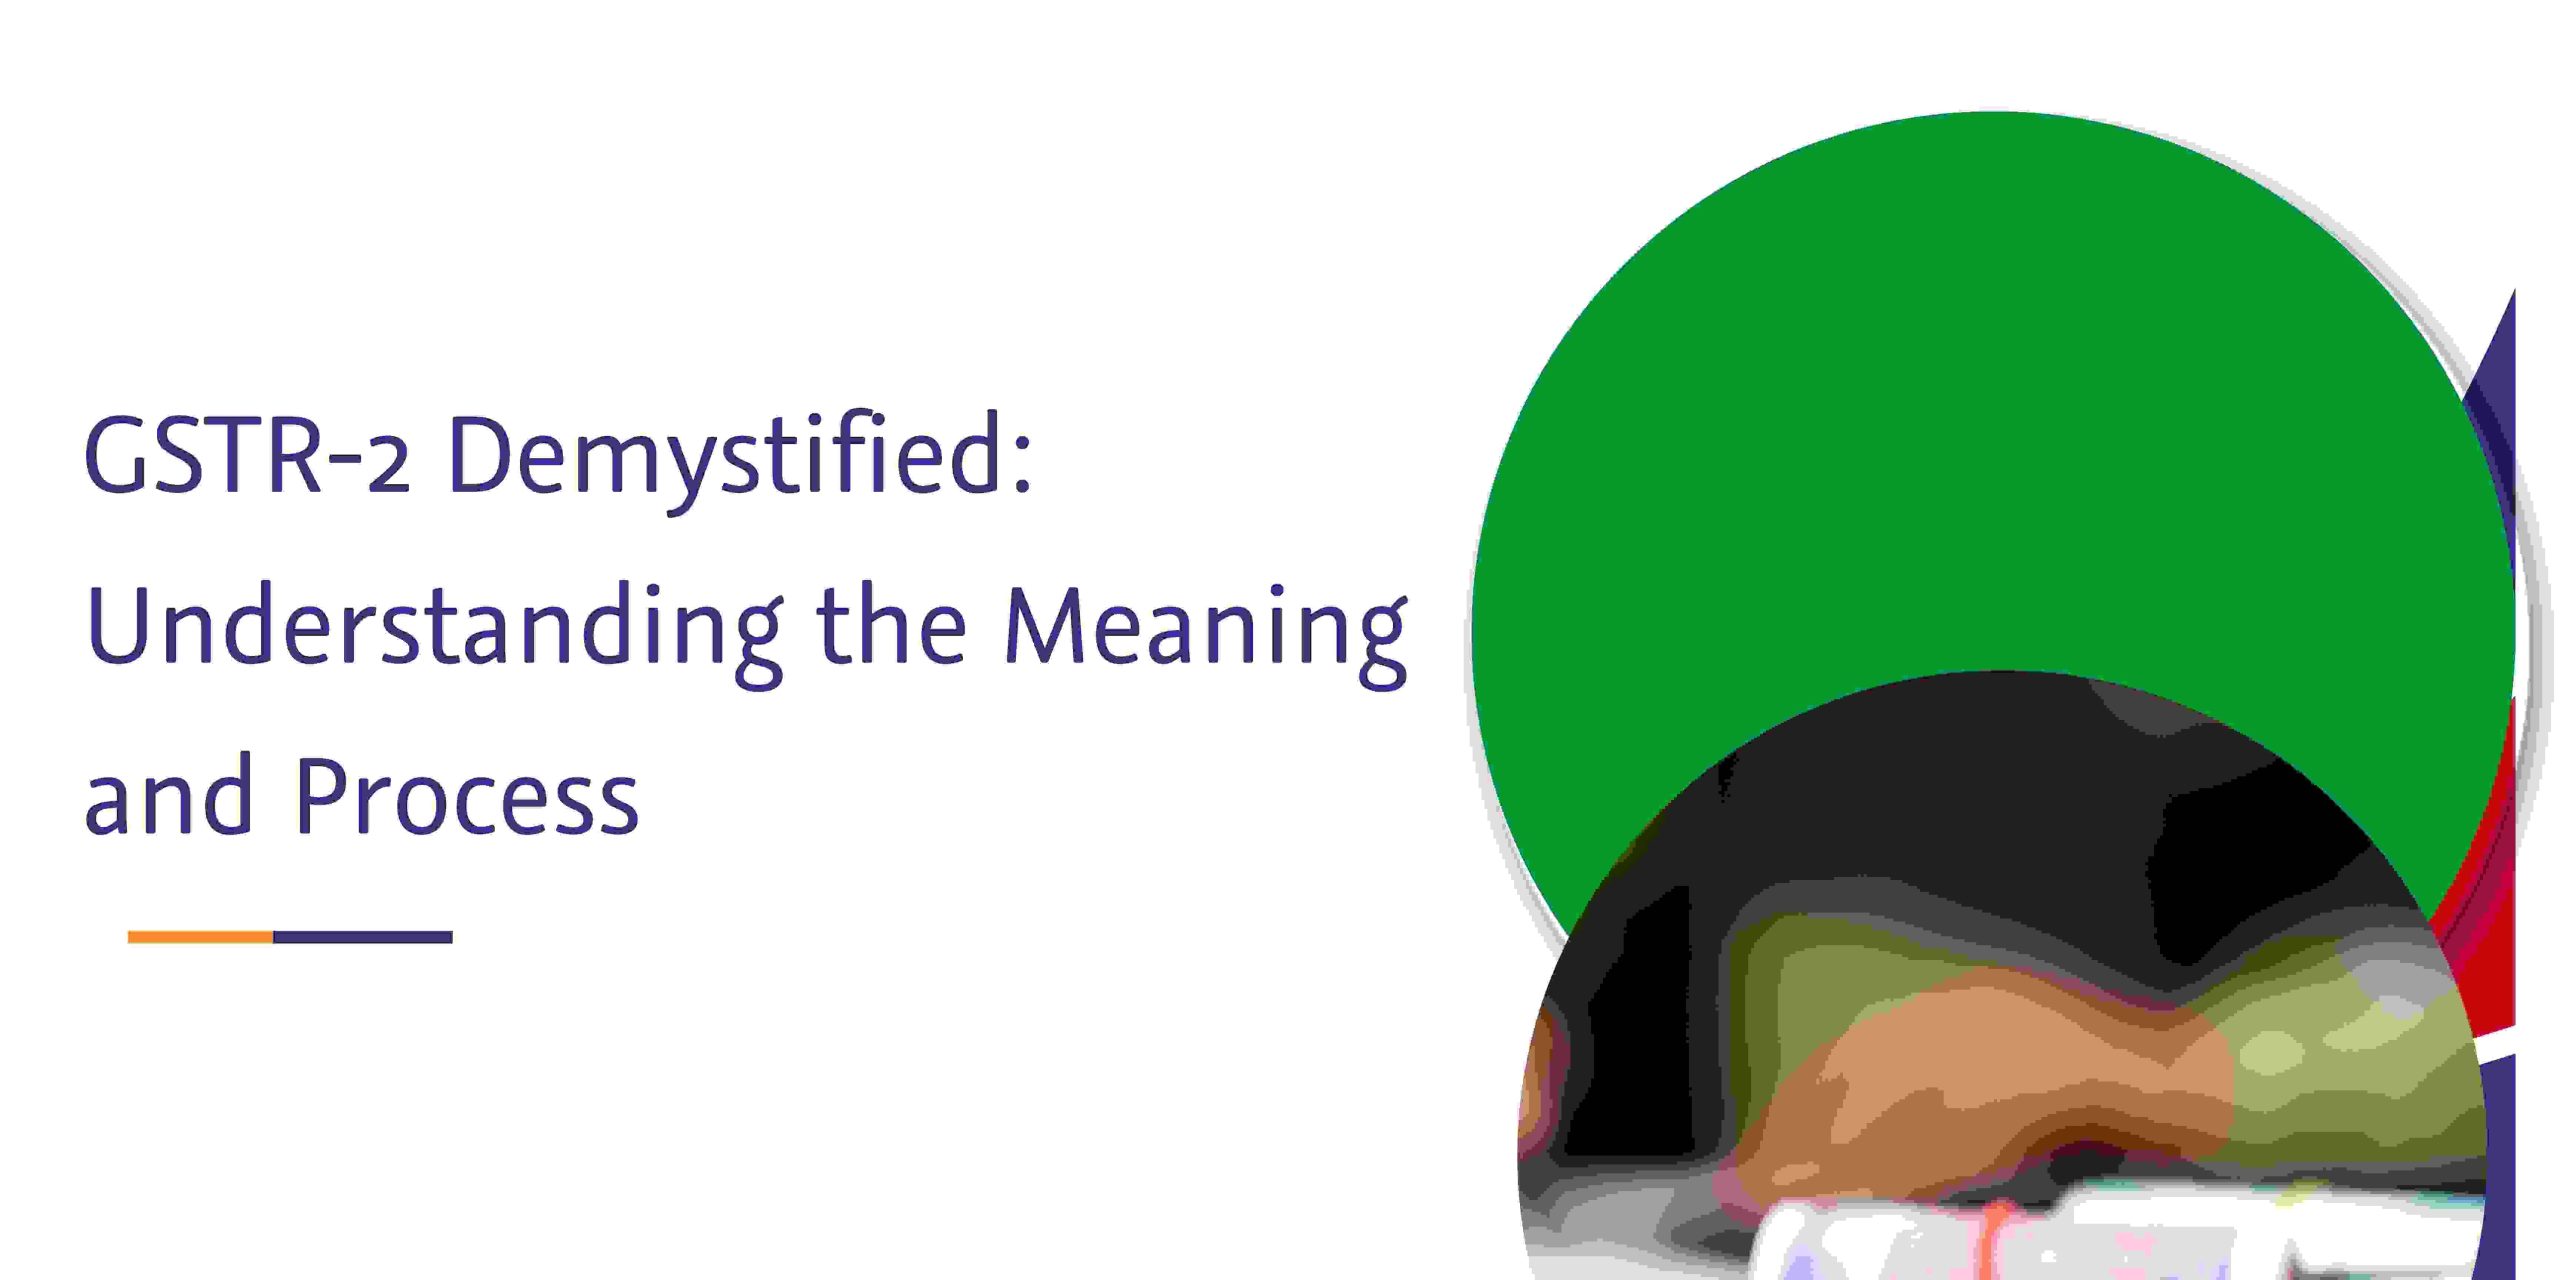 You are currently viewing GSTR-2 Demystified: Understanding the Meaning and Process